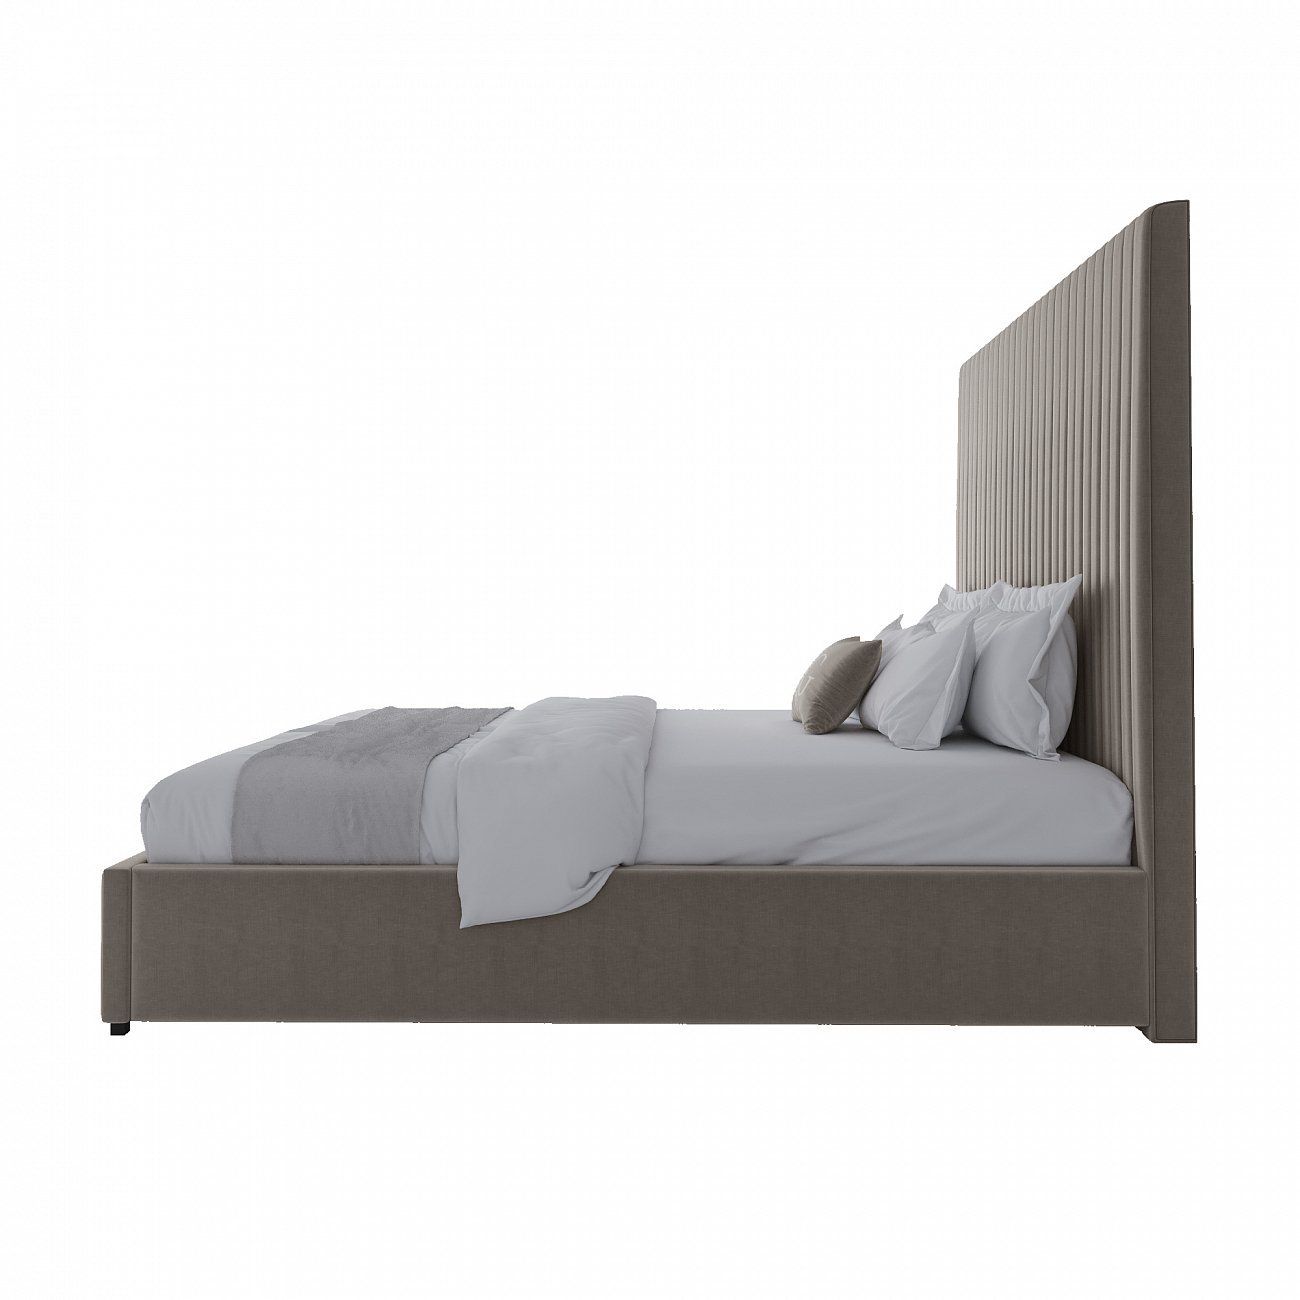 Double bed 180x200 cm pearl gray Mora